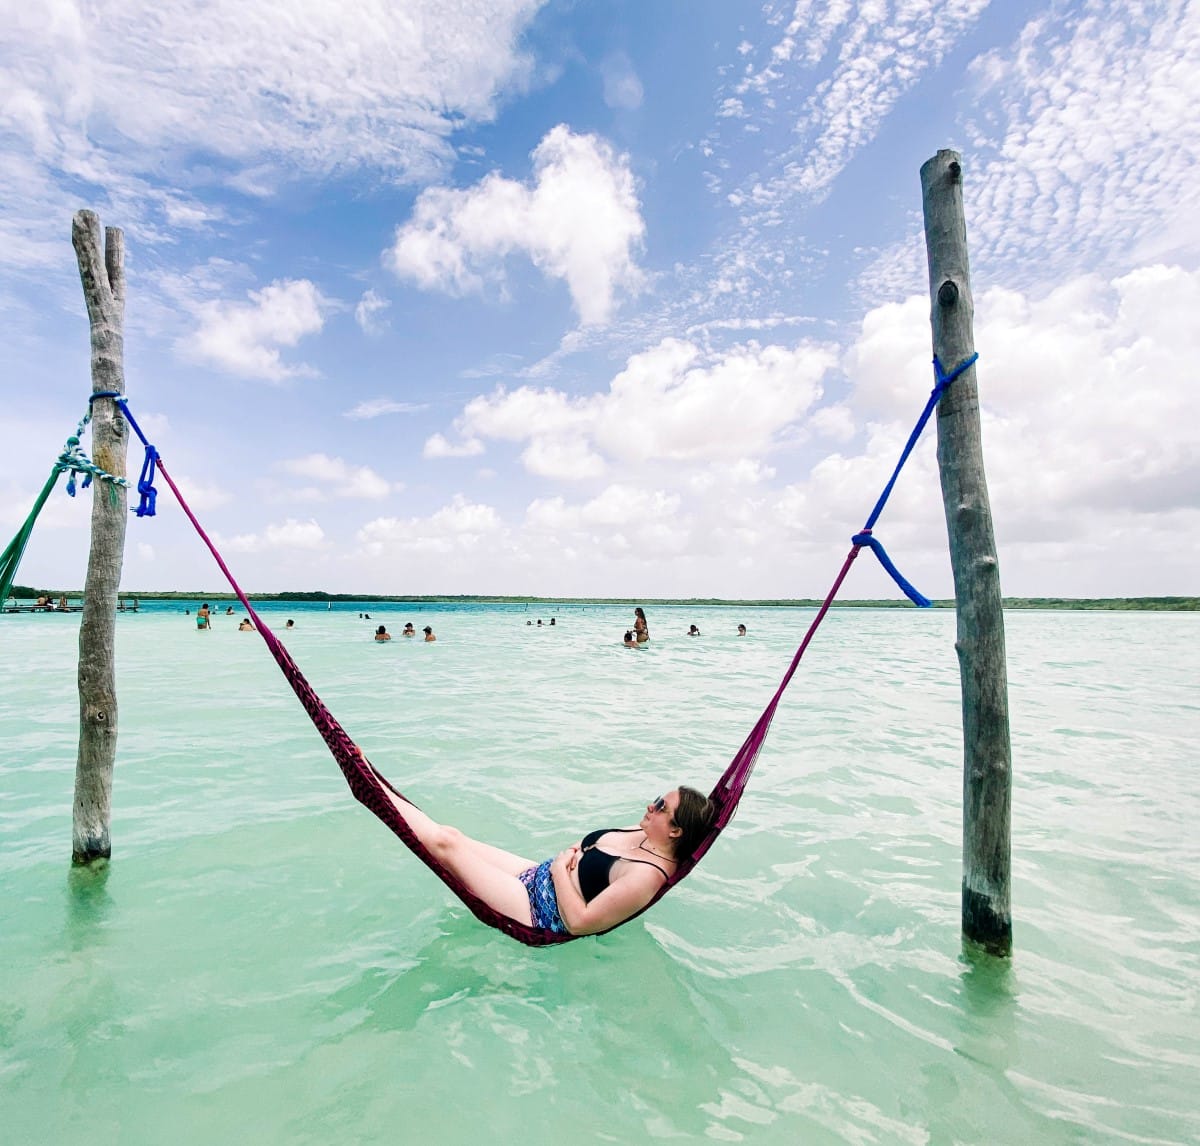 The blog author on a water hammock in the kaan luum lagoon.